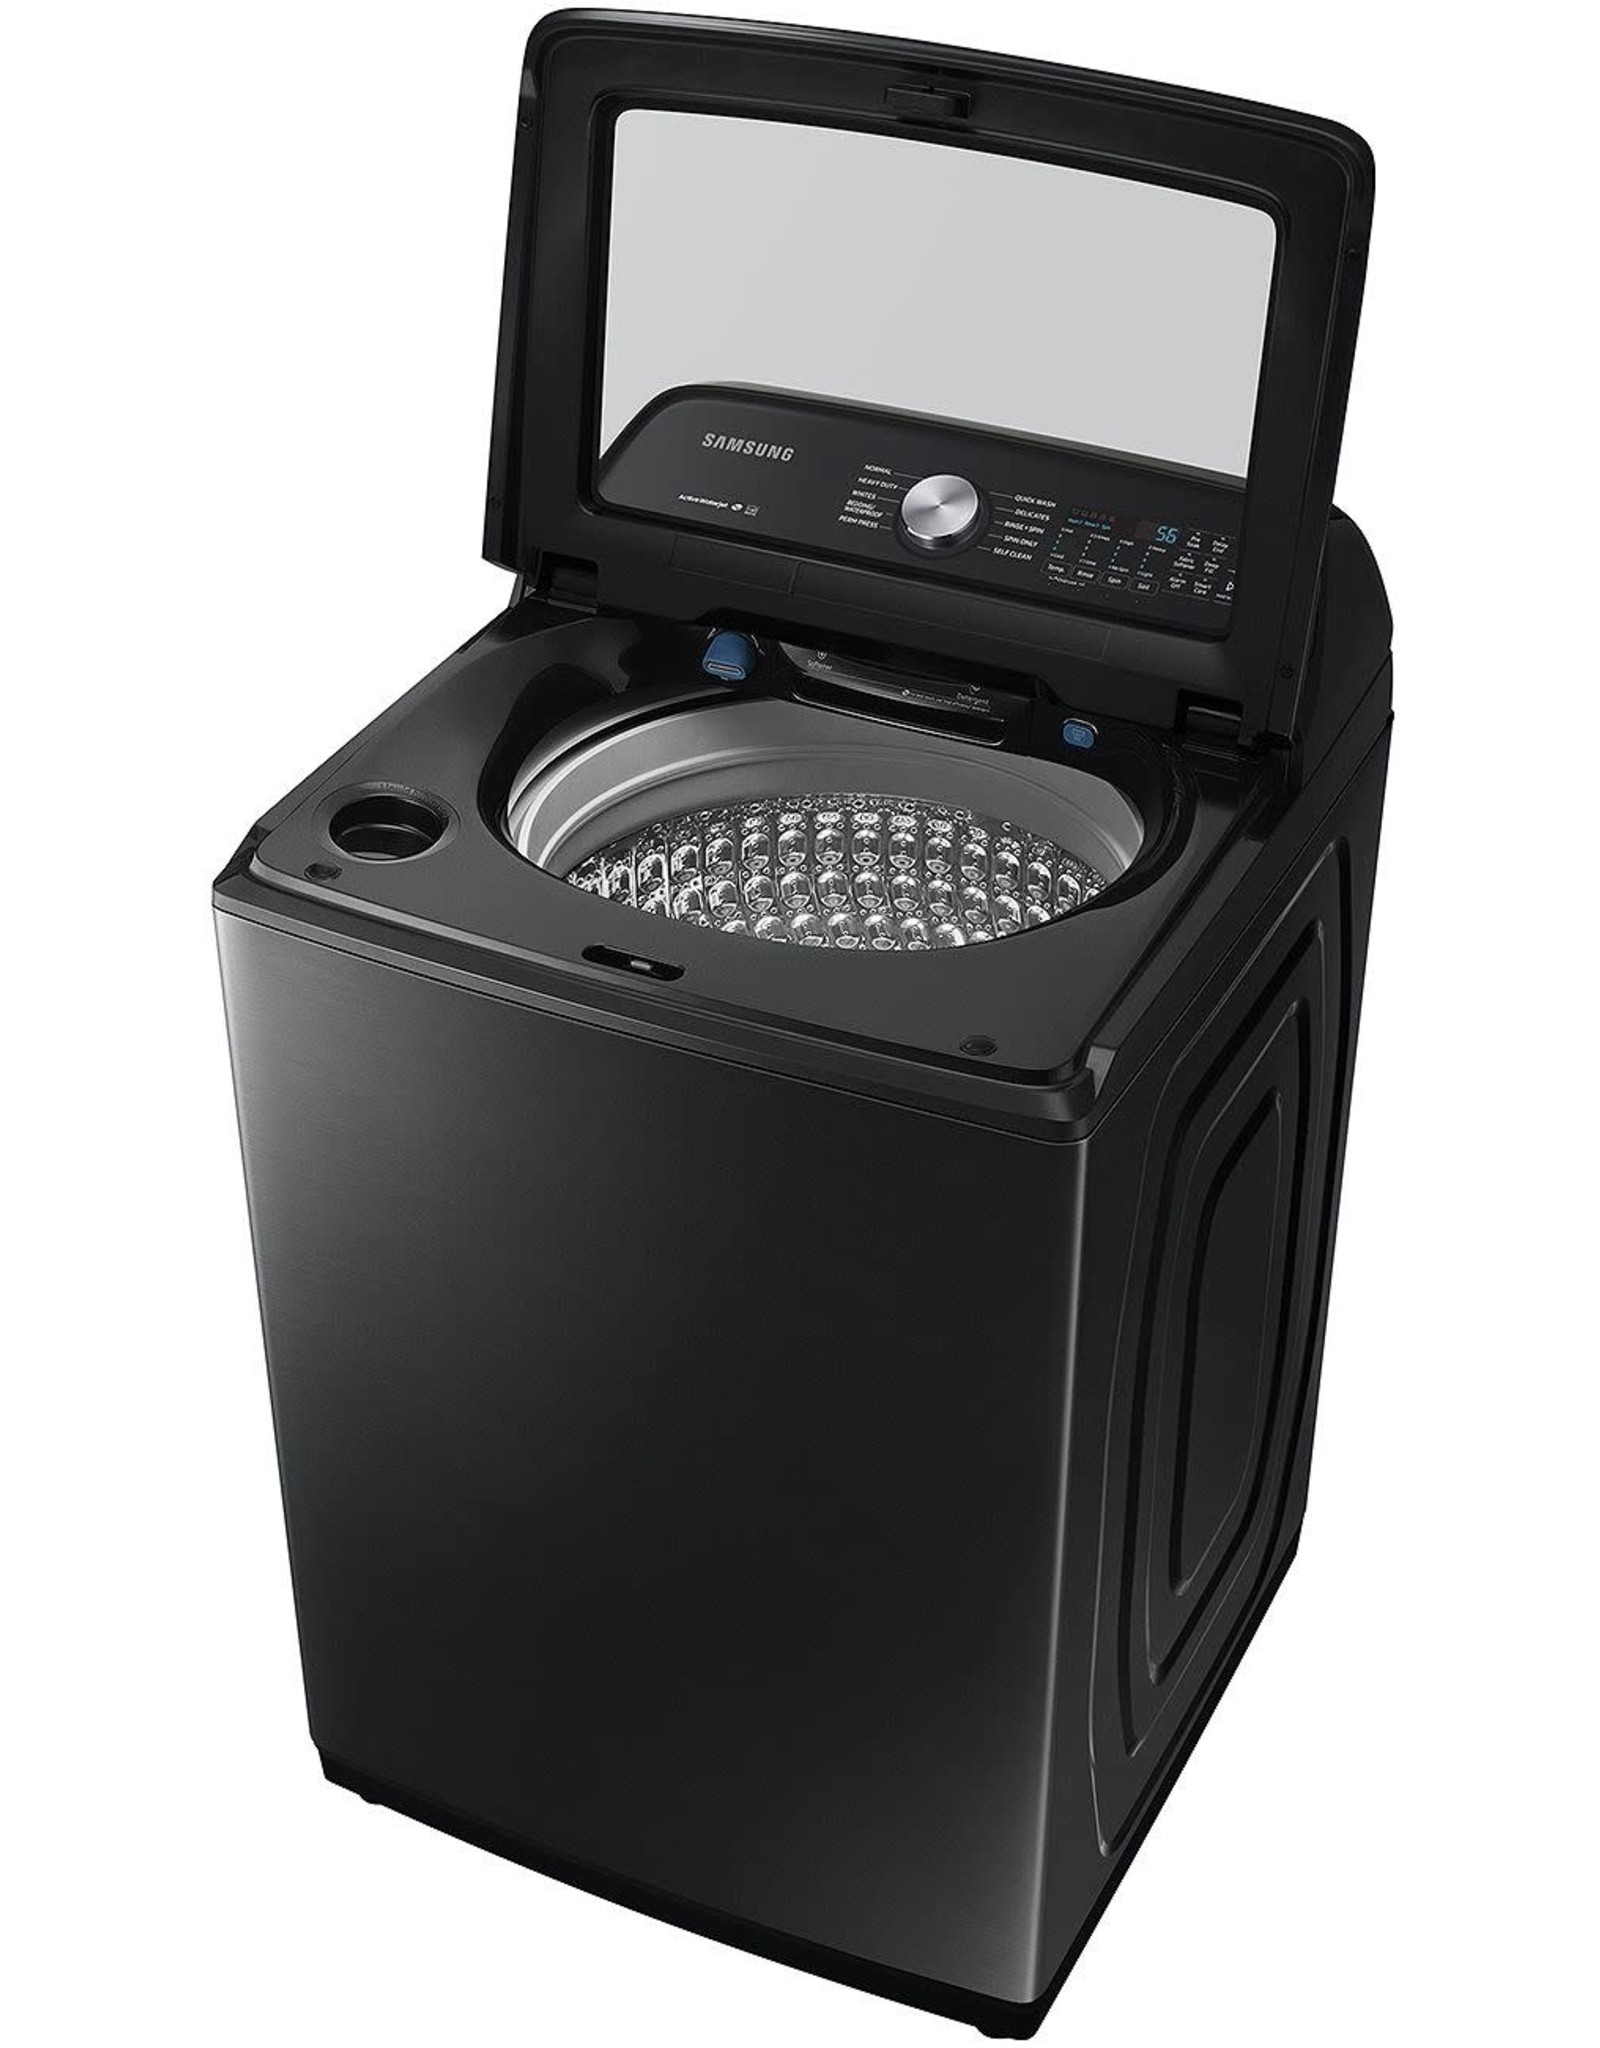 SAMSUNG ( WA50R5200AV5.0 cu. ft. High-Efficiency Brushed Black Top Load Washing Machine with Active Water Jet, ENERGY STAR